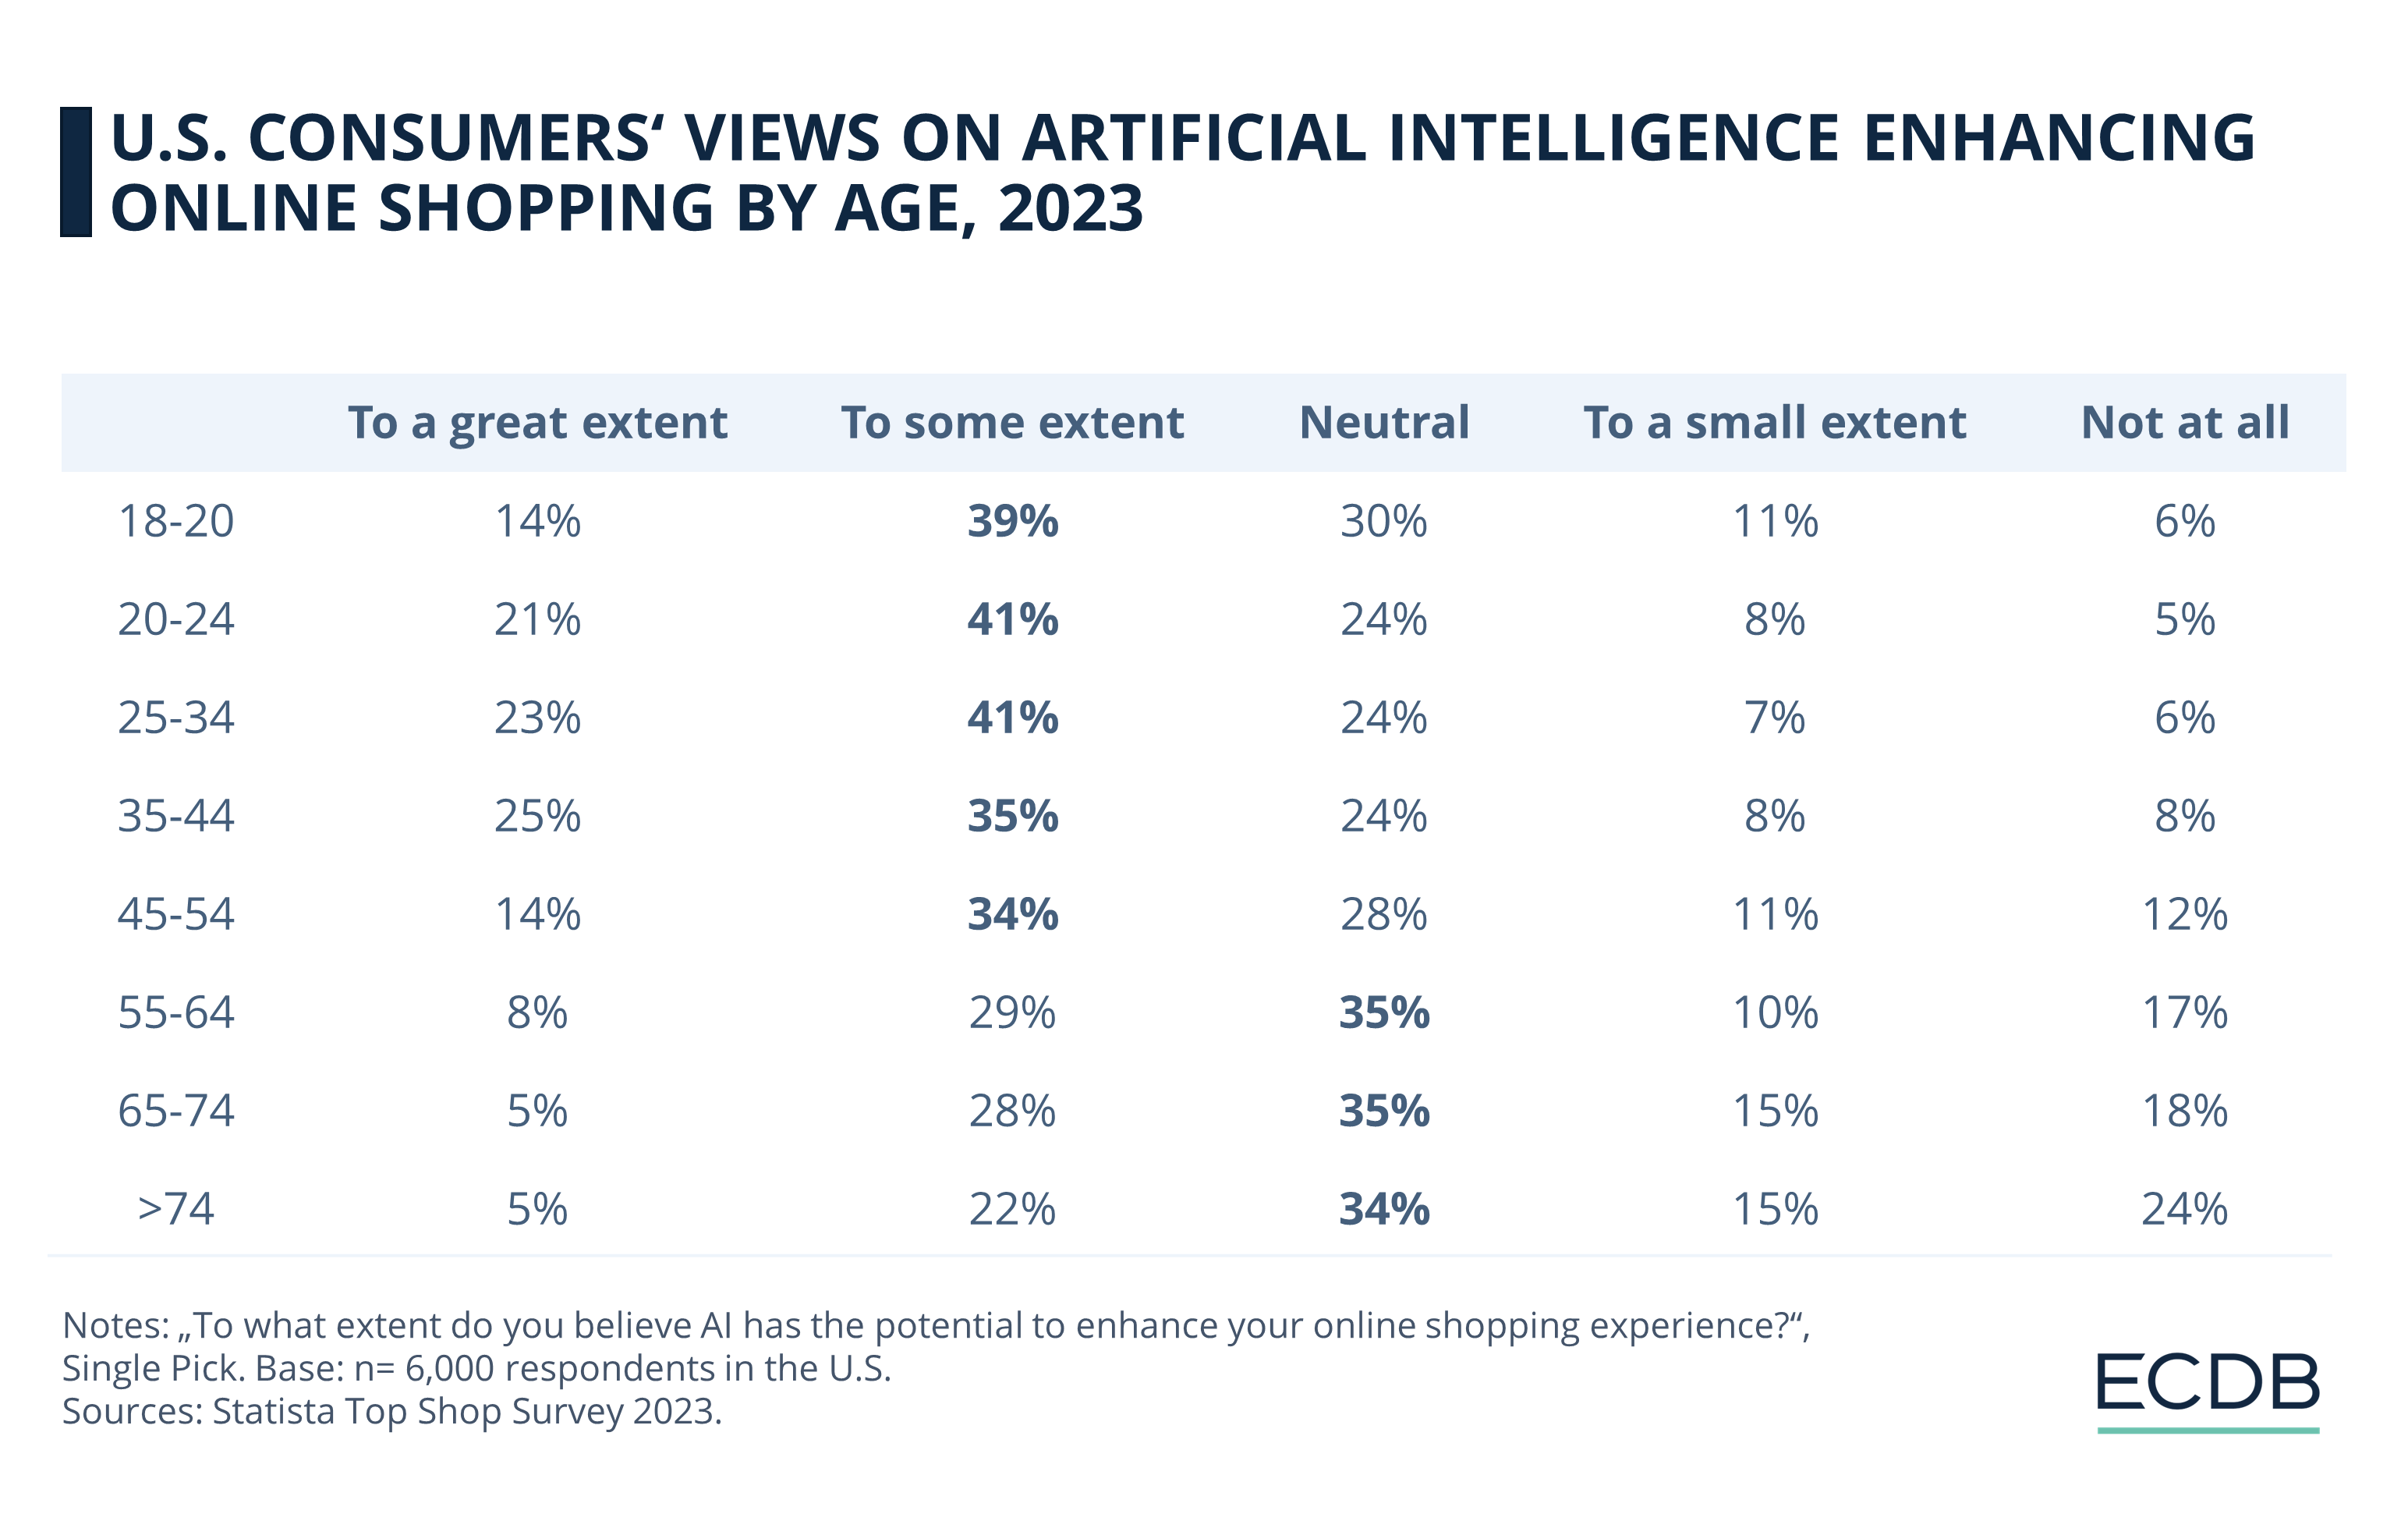 U.S. Consumers' View on Artificial Intelligence Enhancing Online Shopping by Age, 2023